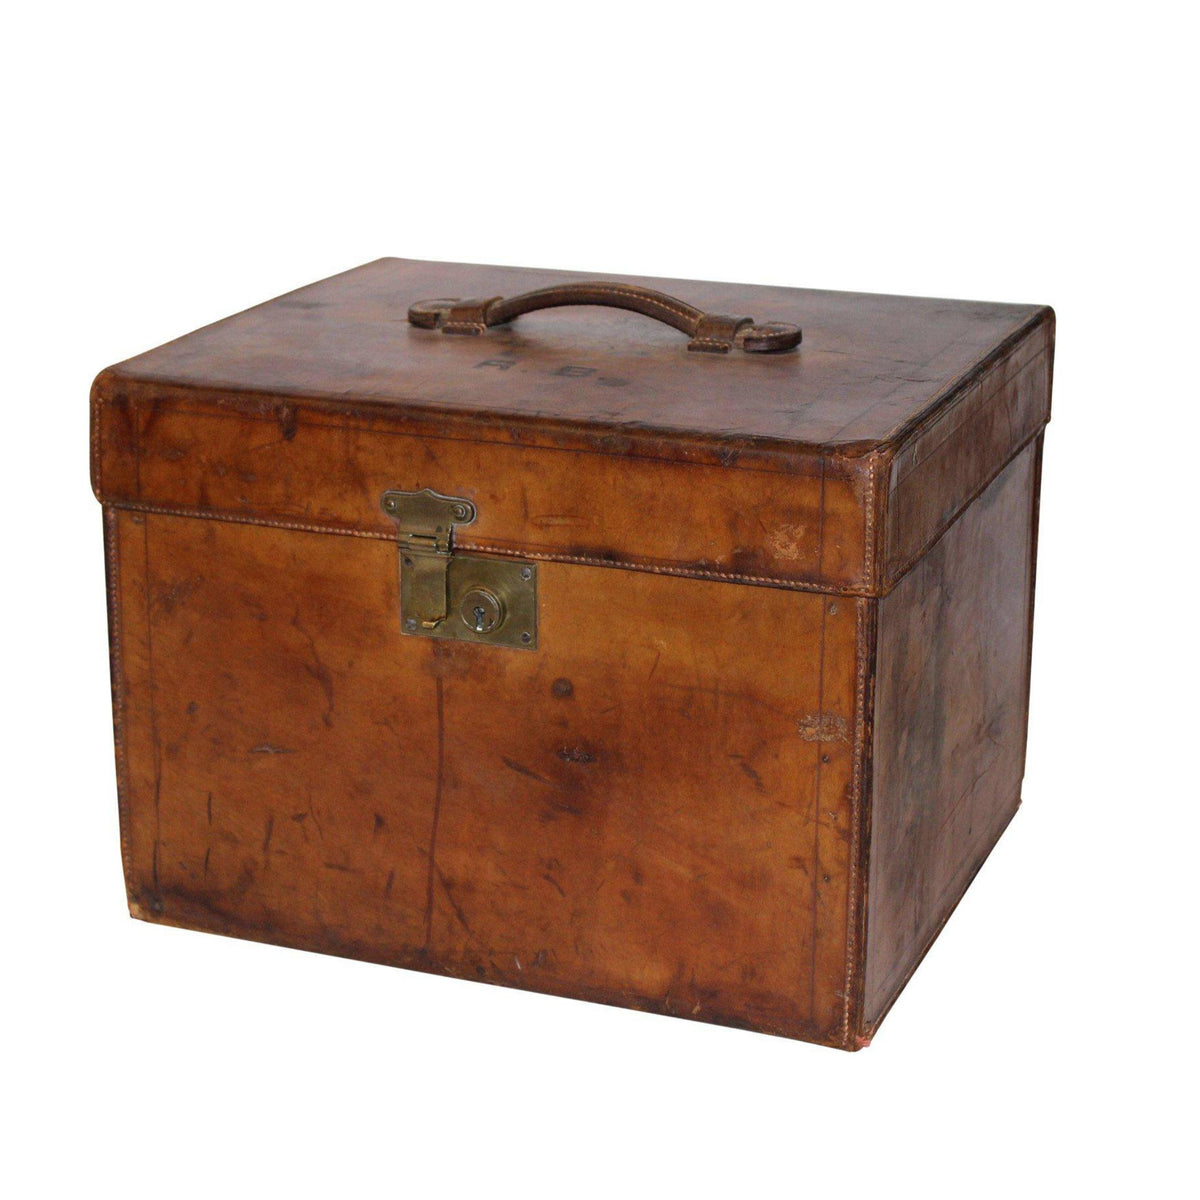 Hat Trunk with RB Initials